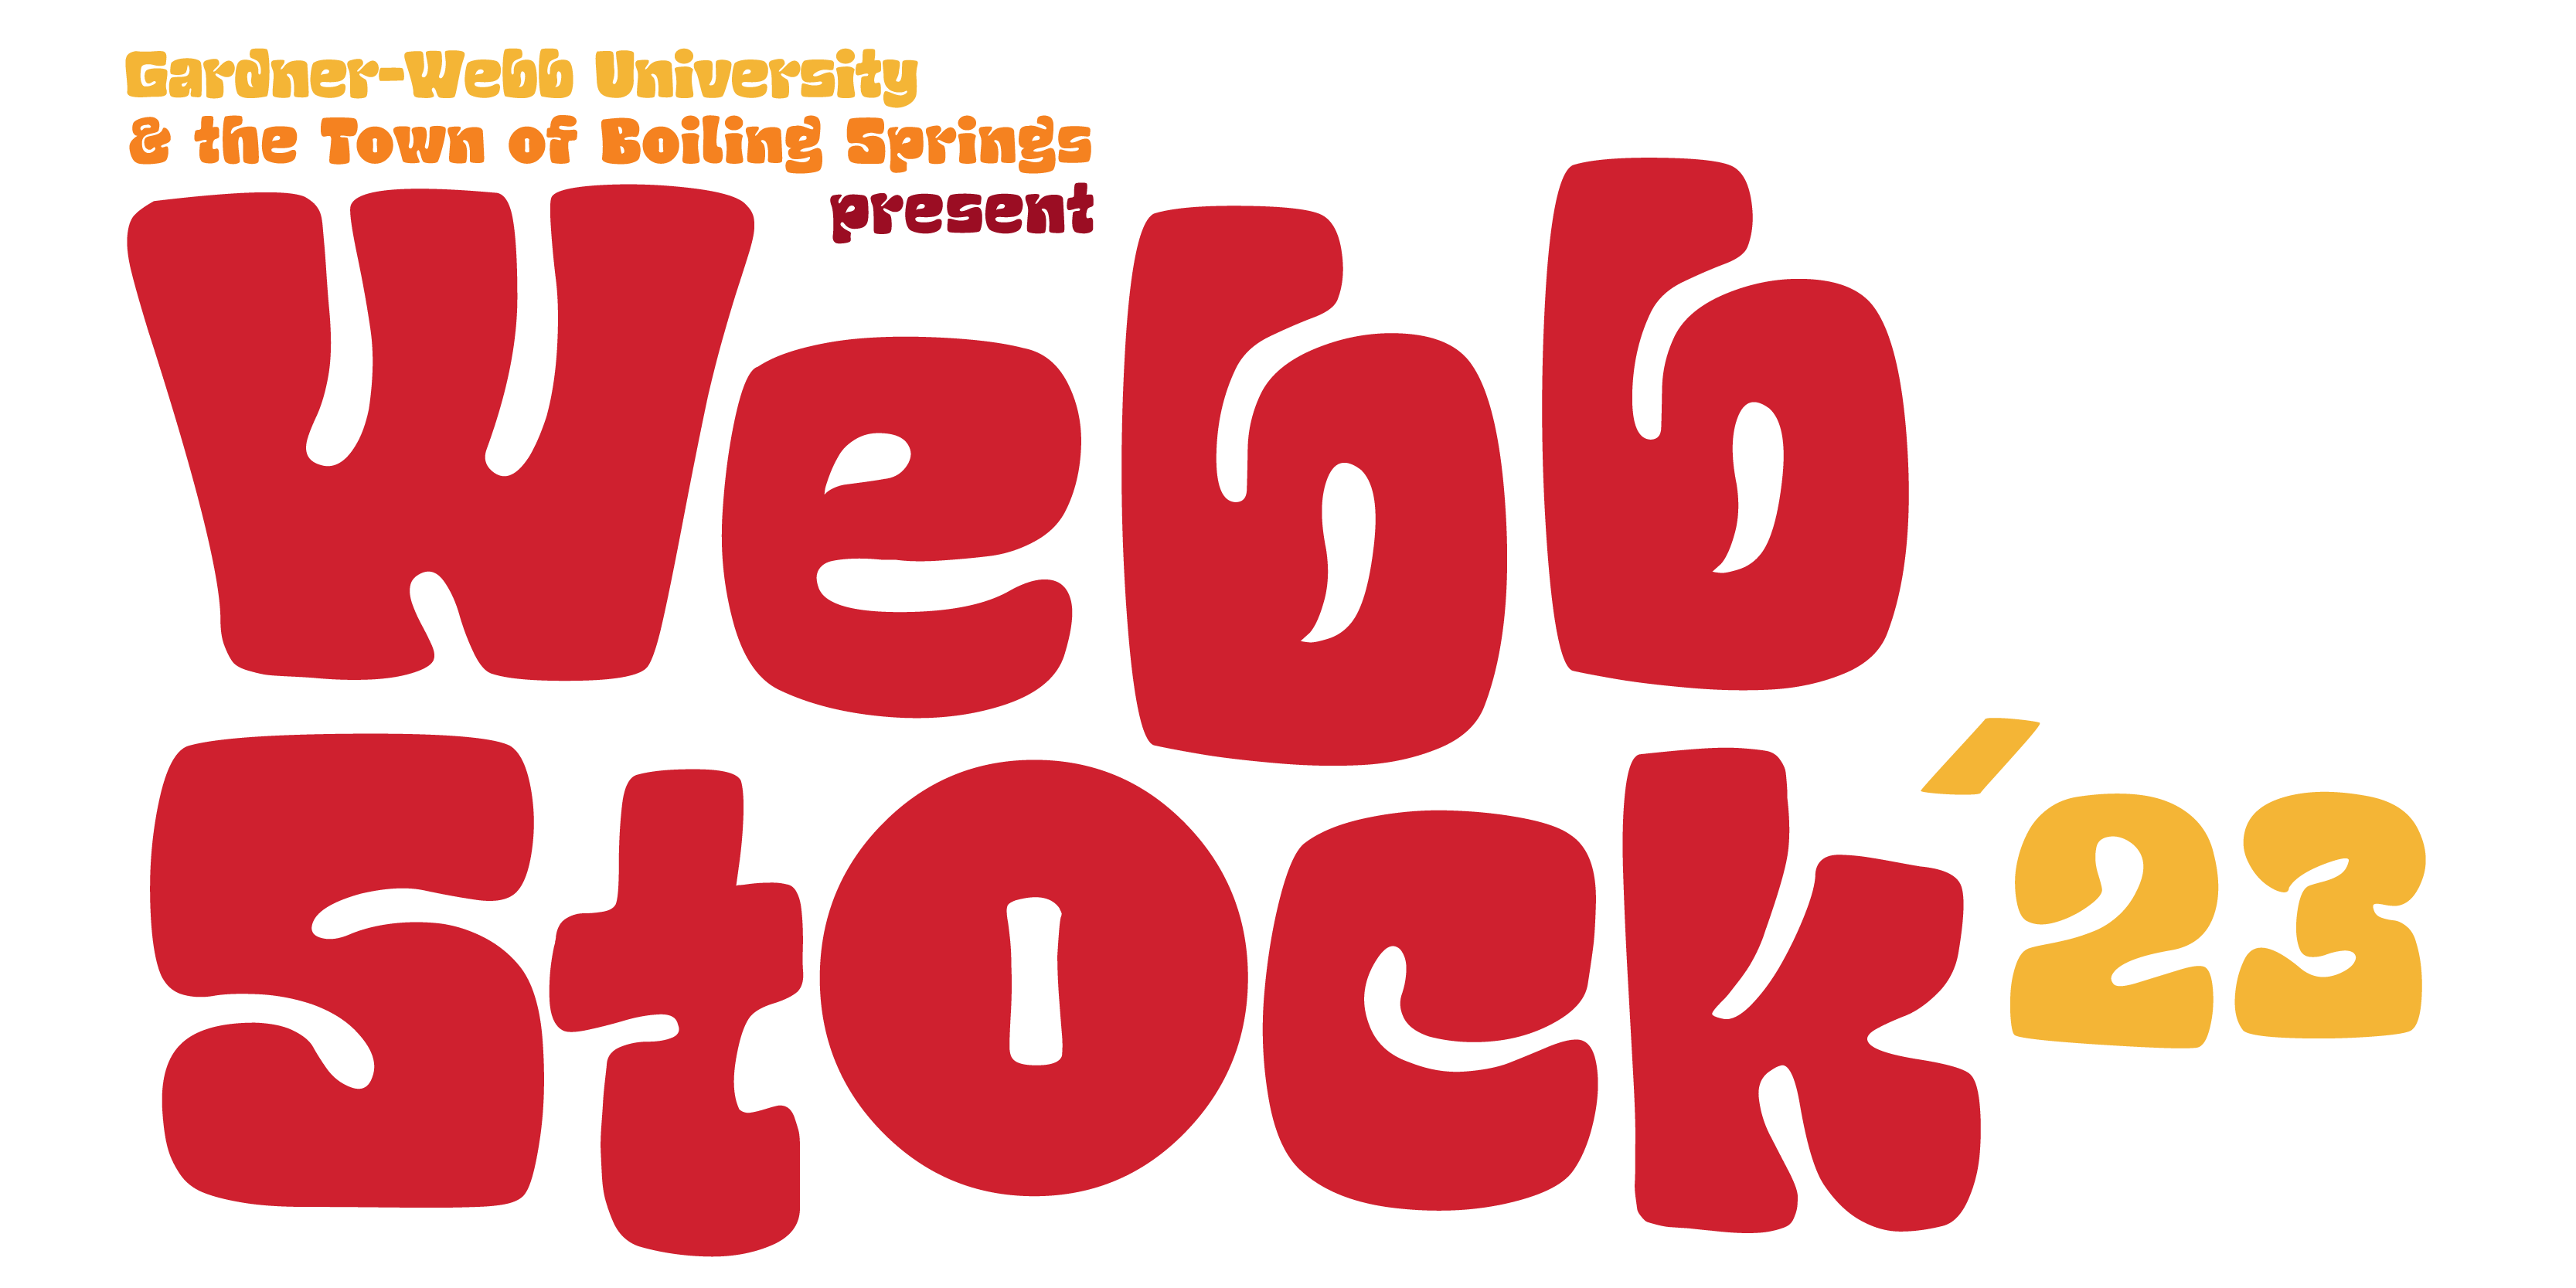 GWU and Town of Boiling Springs present Webbstock